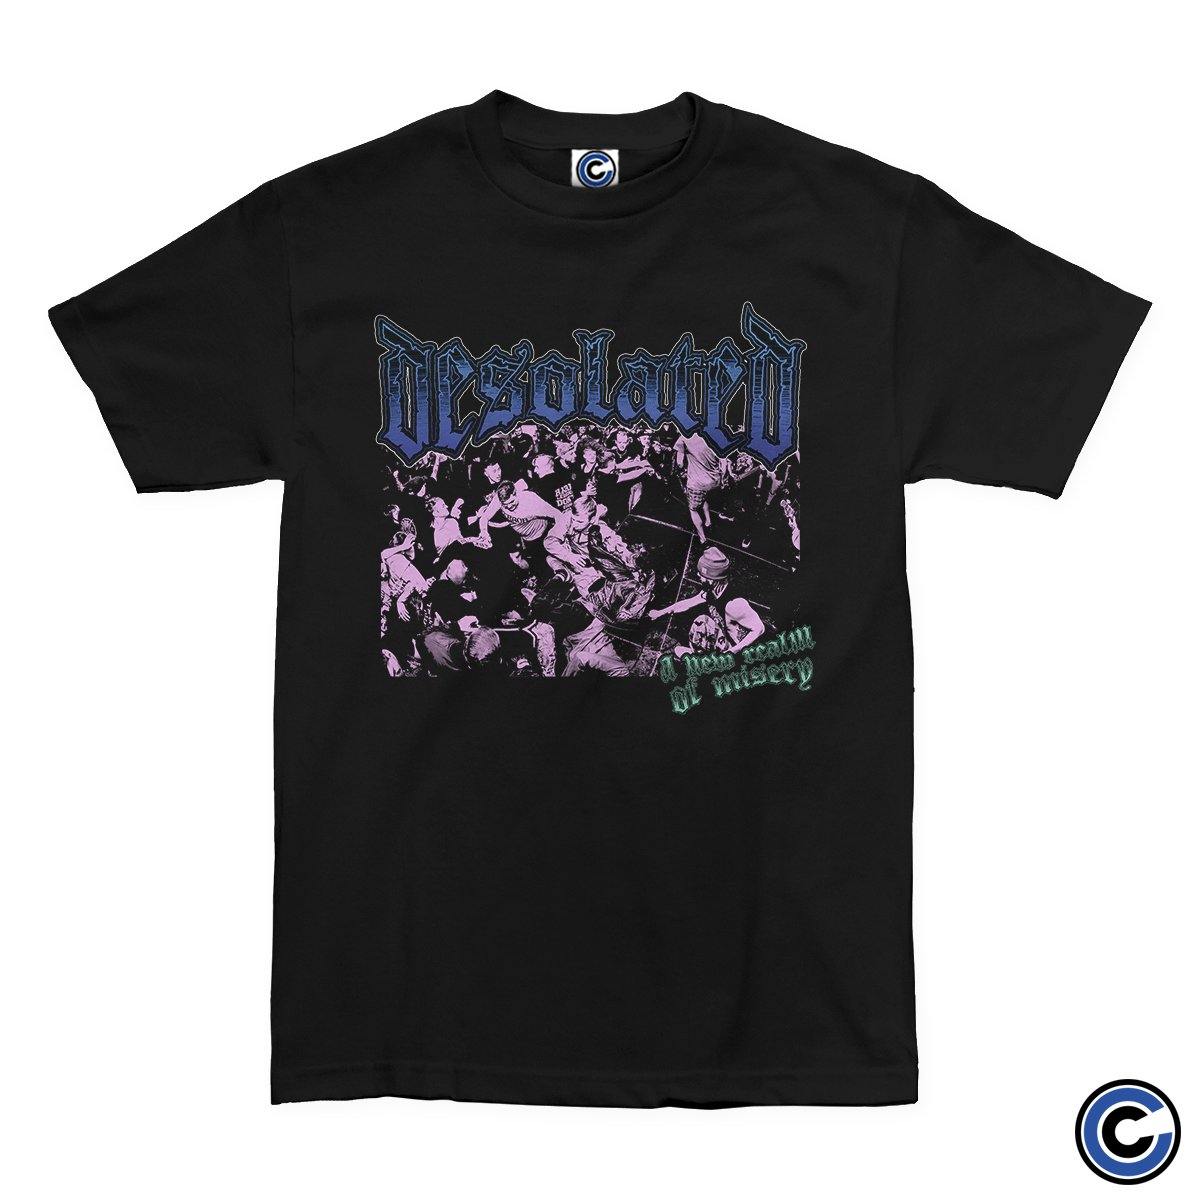 Buy – Desolated "New Realm" Shirt – Band & Music Merch – Cold Cuts Merch